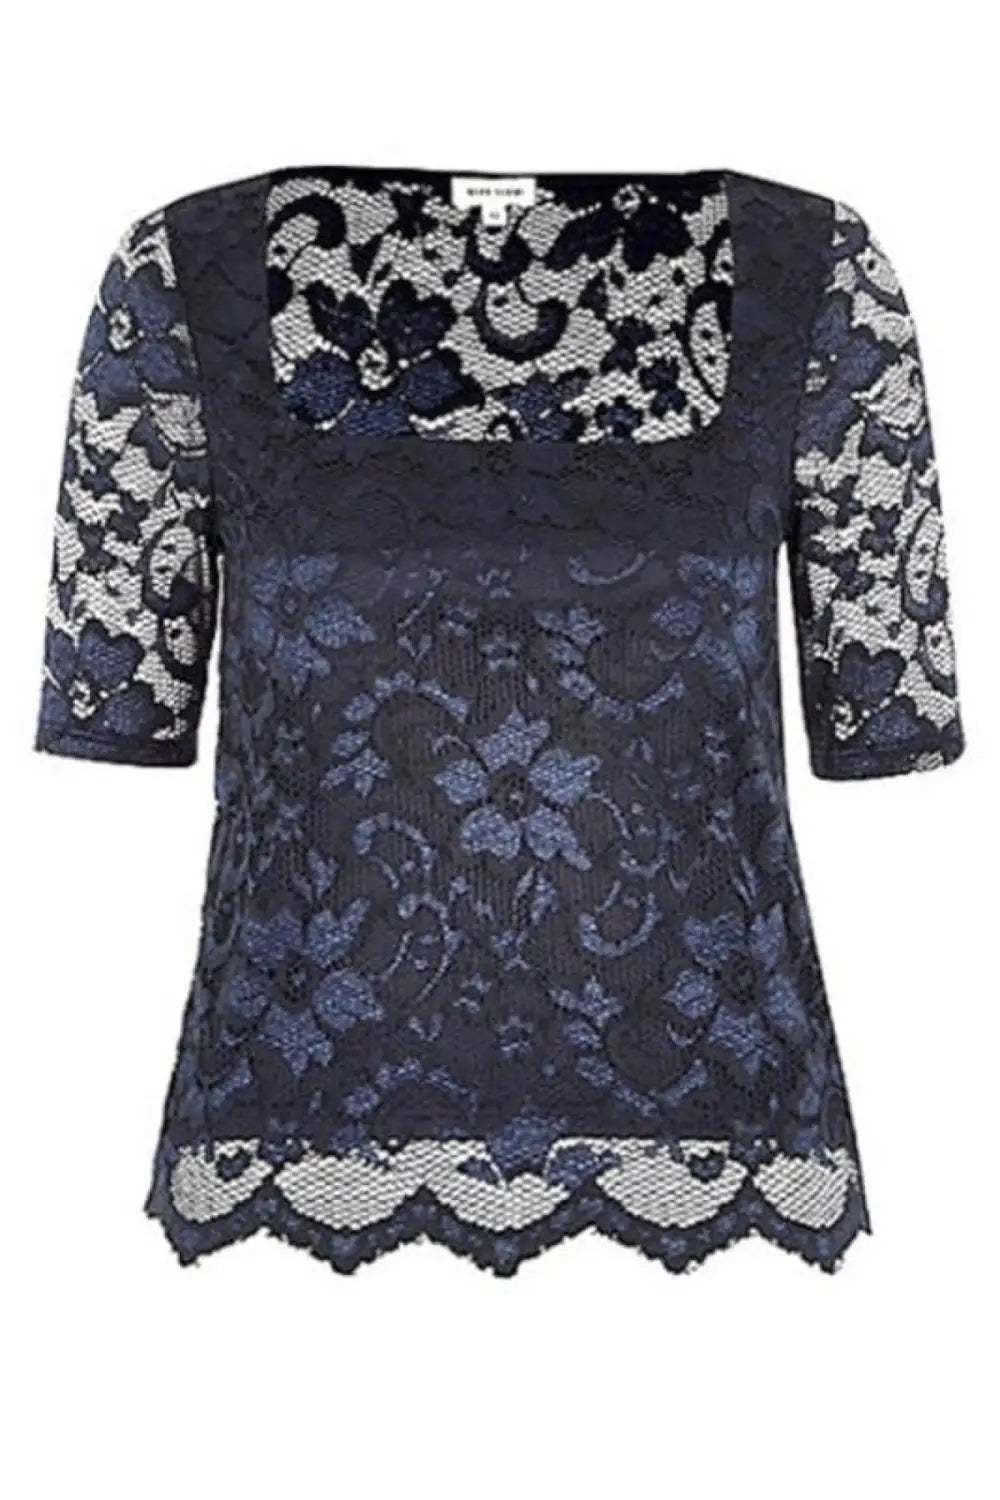 River Island Lace Short Sleeve Top